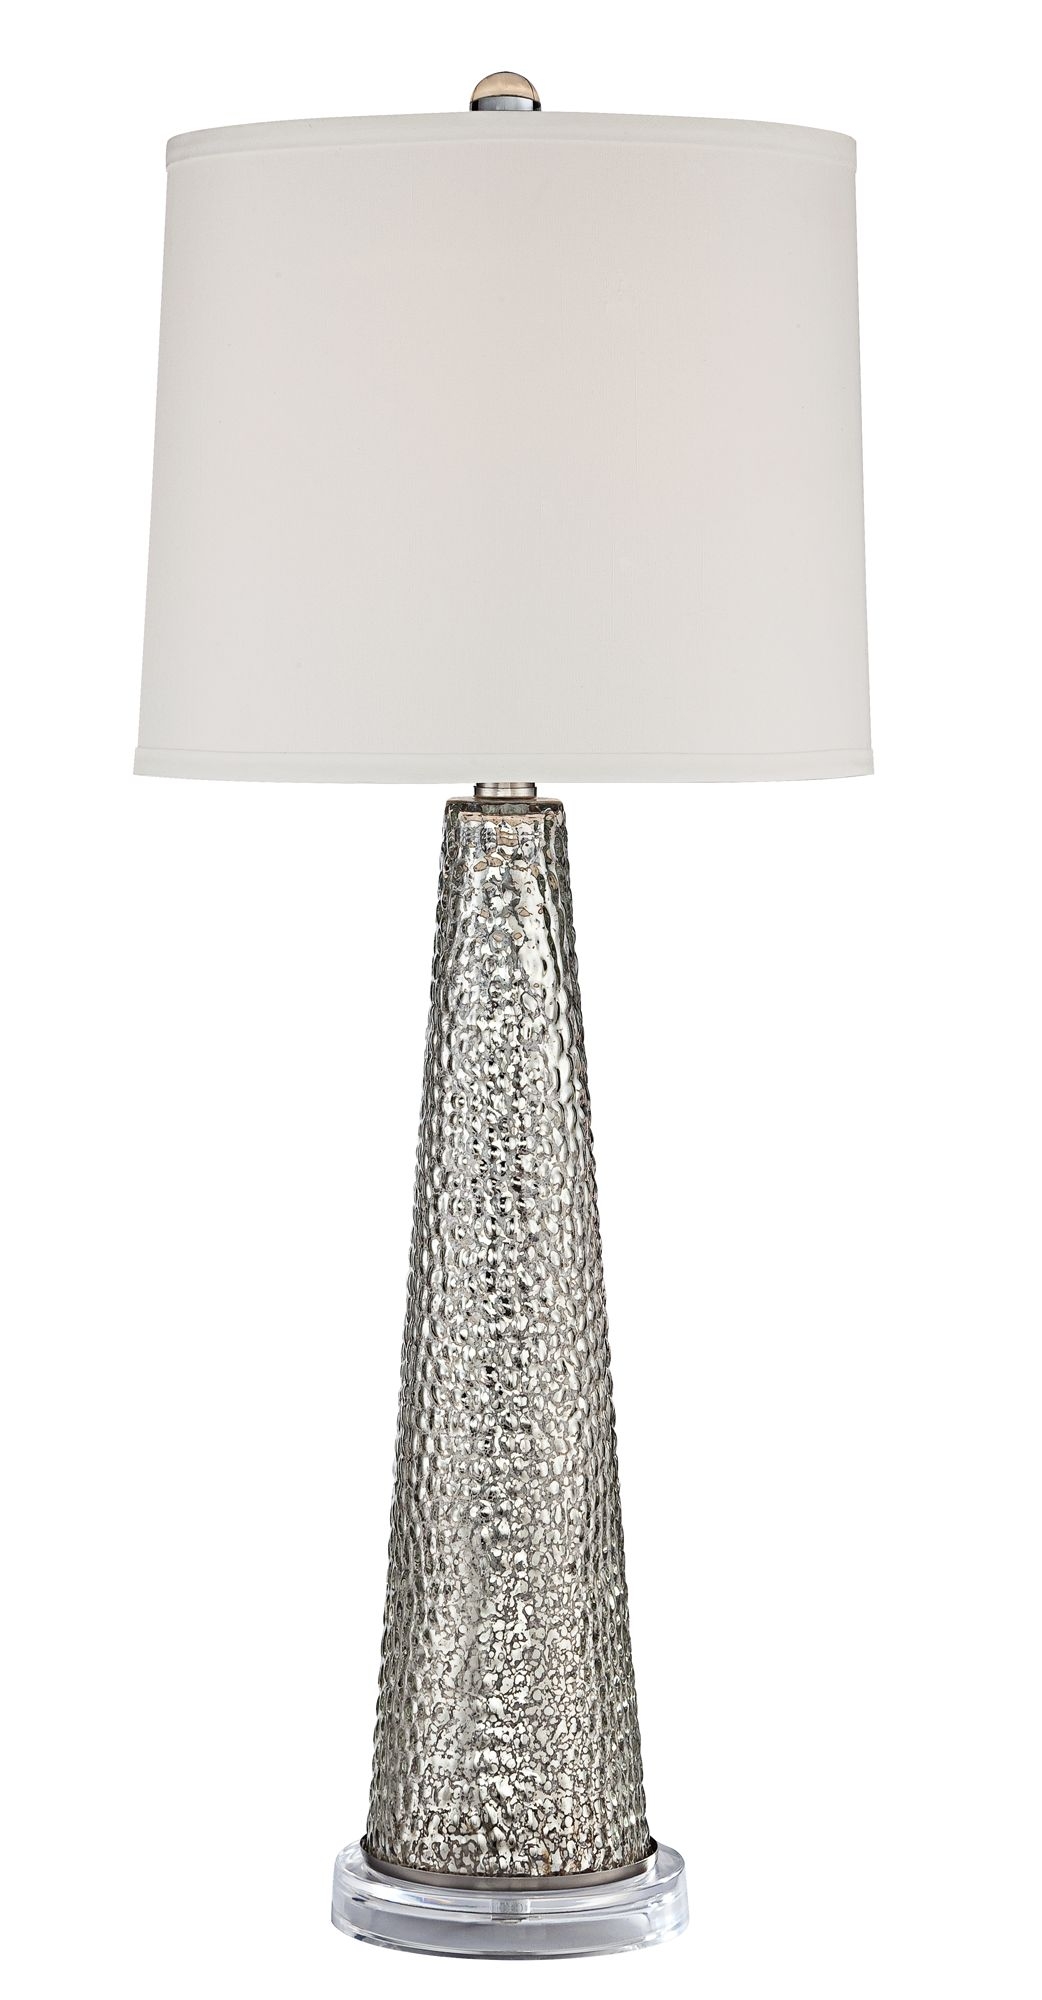 Hobbes Tapered Mercury Glass Table Lamp - Image 0